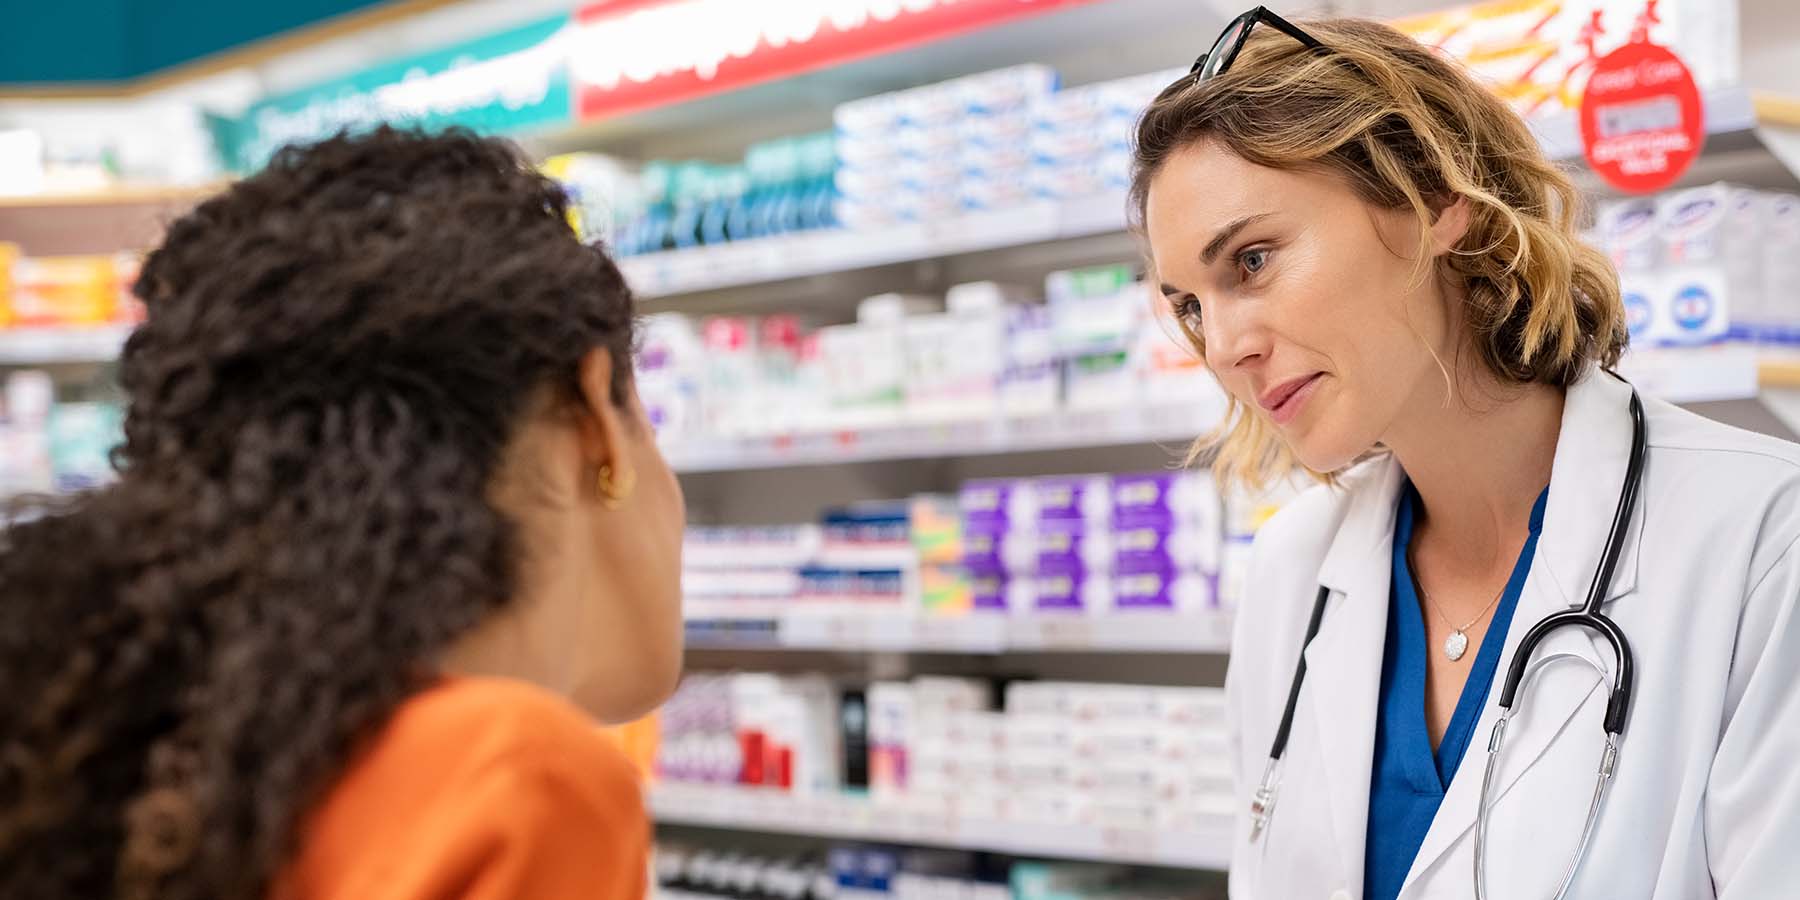 Pharmacist discussing prescription with patient